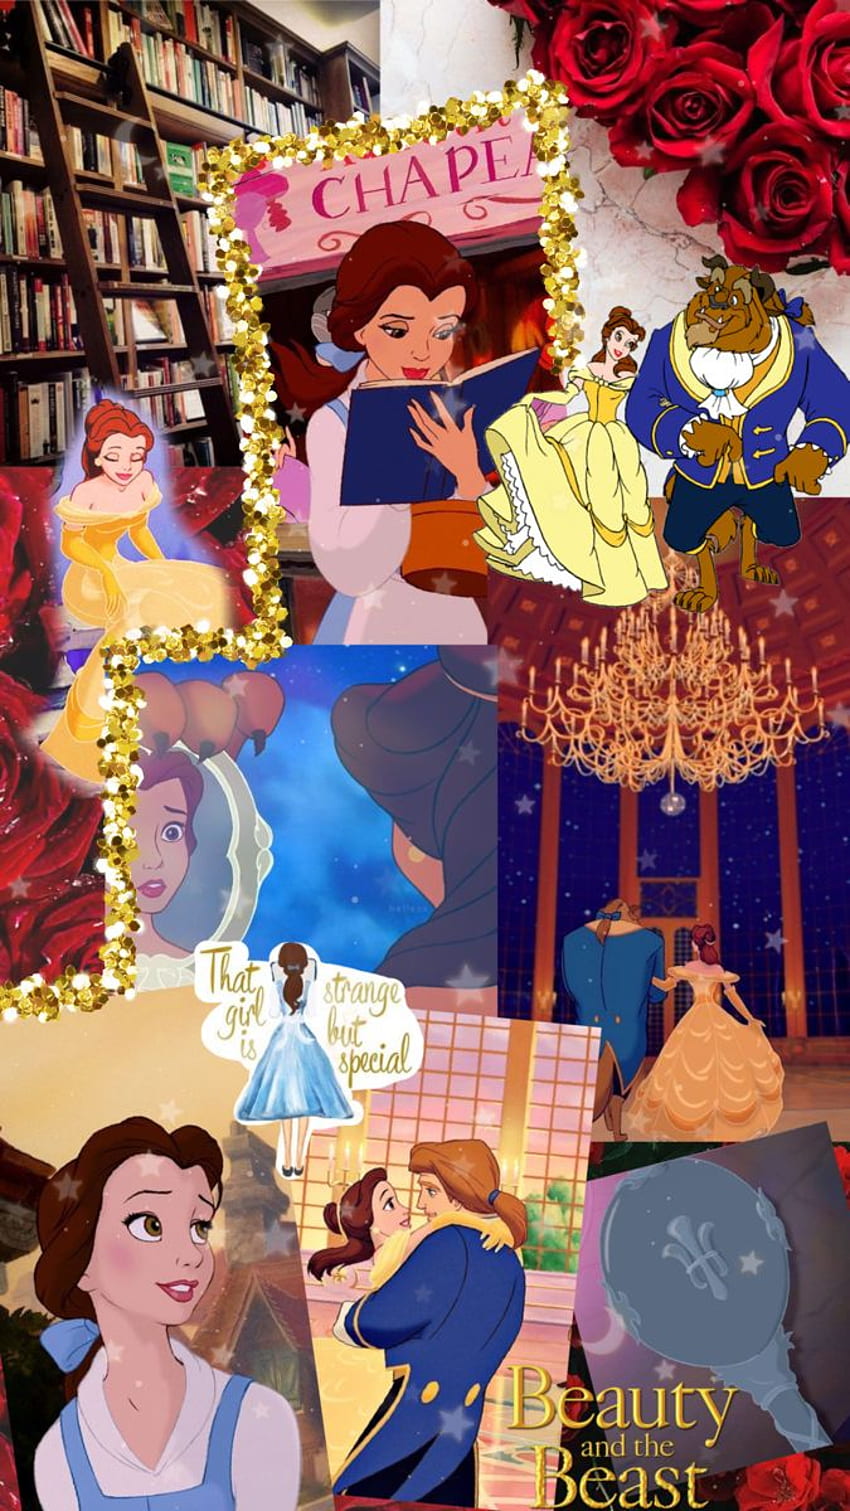 A collage of images from the movie Beauty and the Beast - Belle